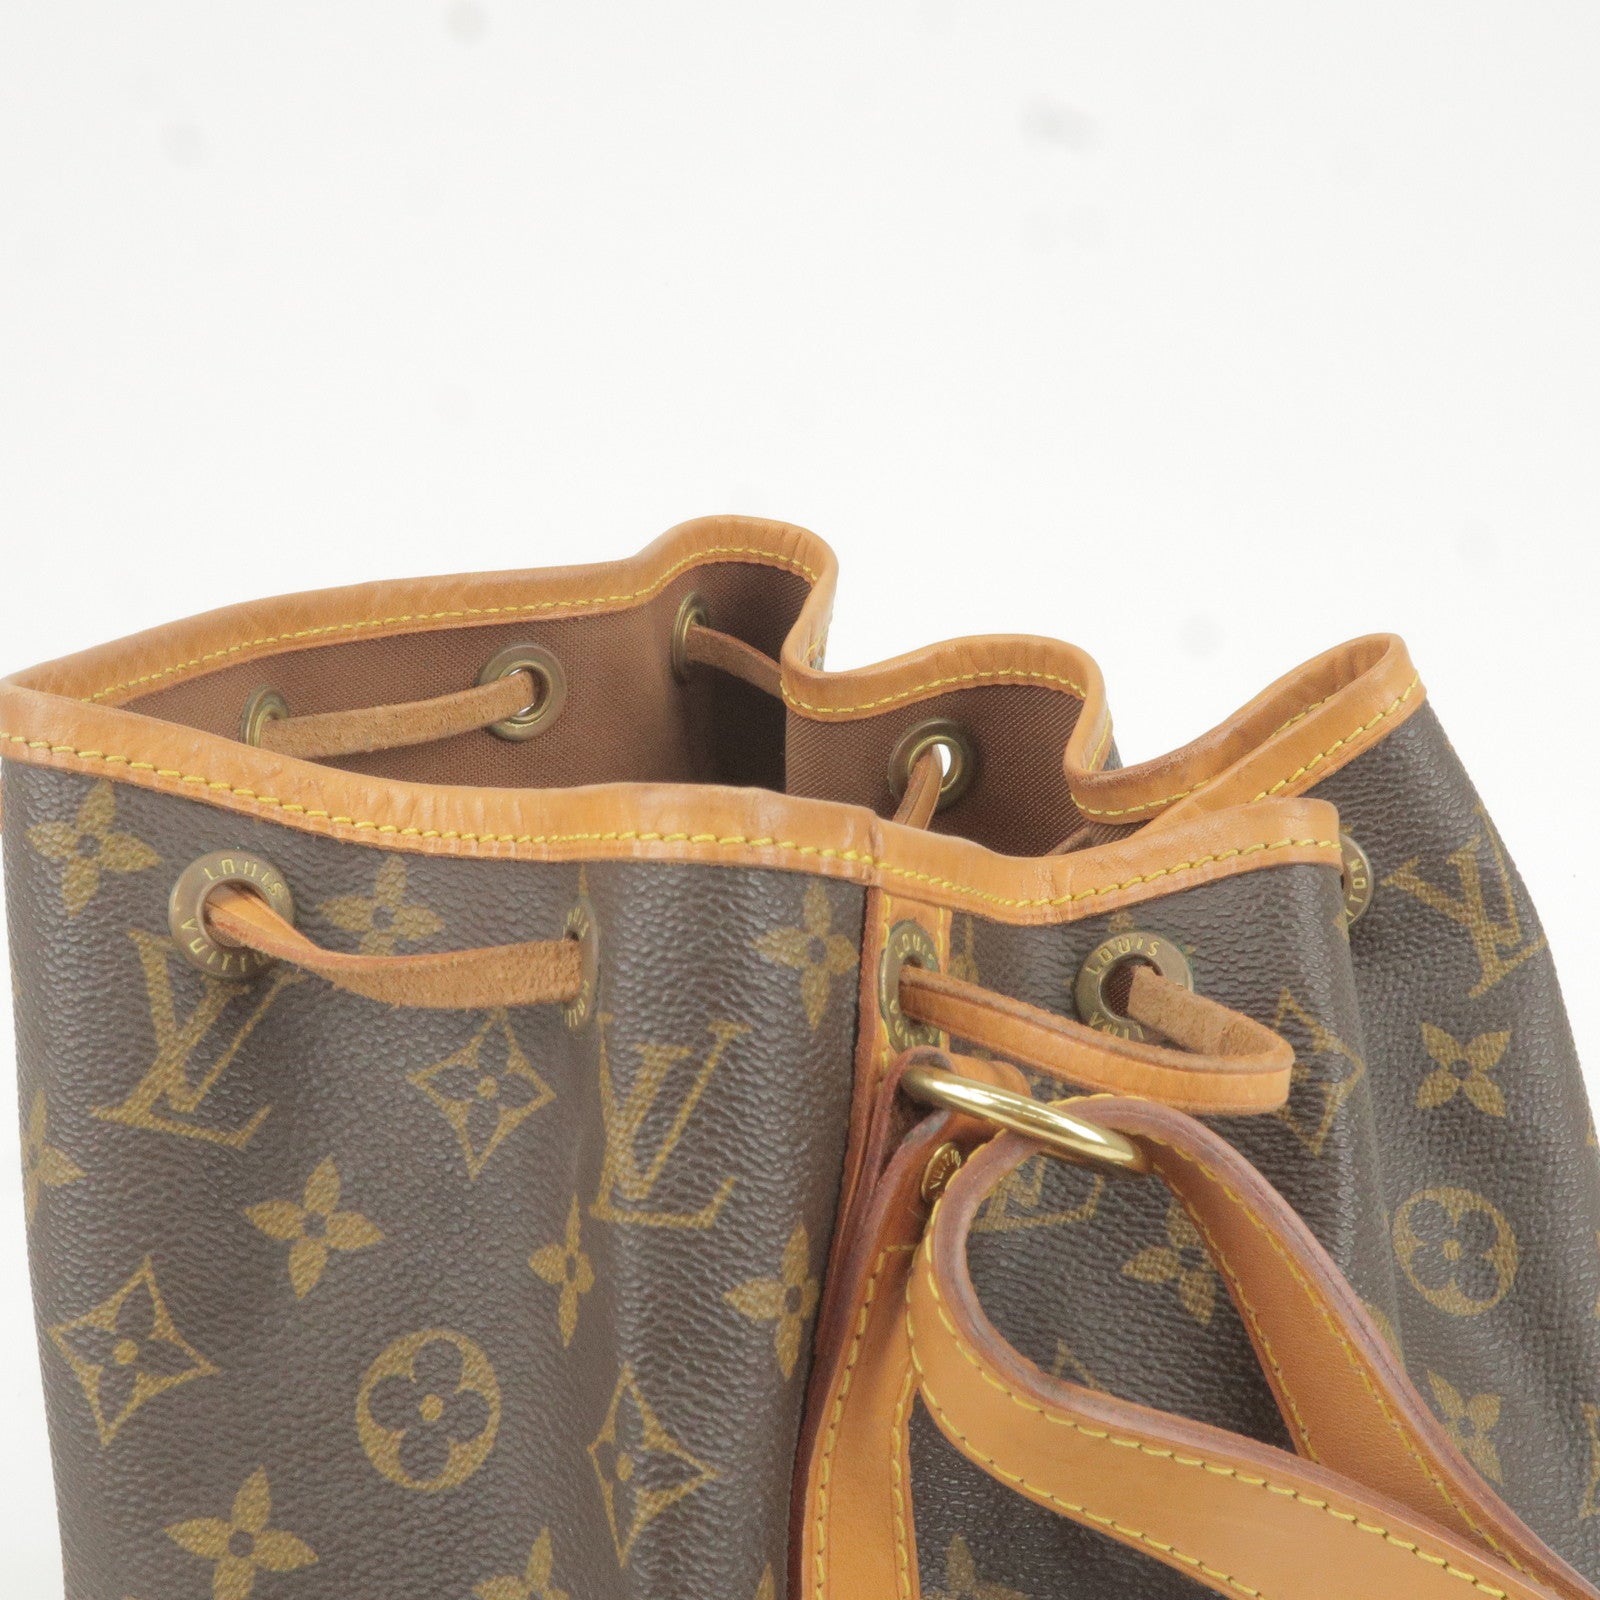 Louis+Vuitton+OnTheGo+Tote+PM+Navy+Nacre+Leather for sale online